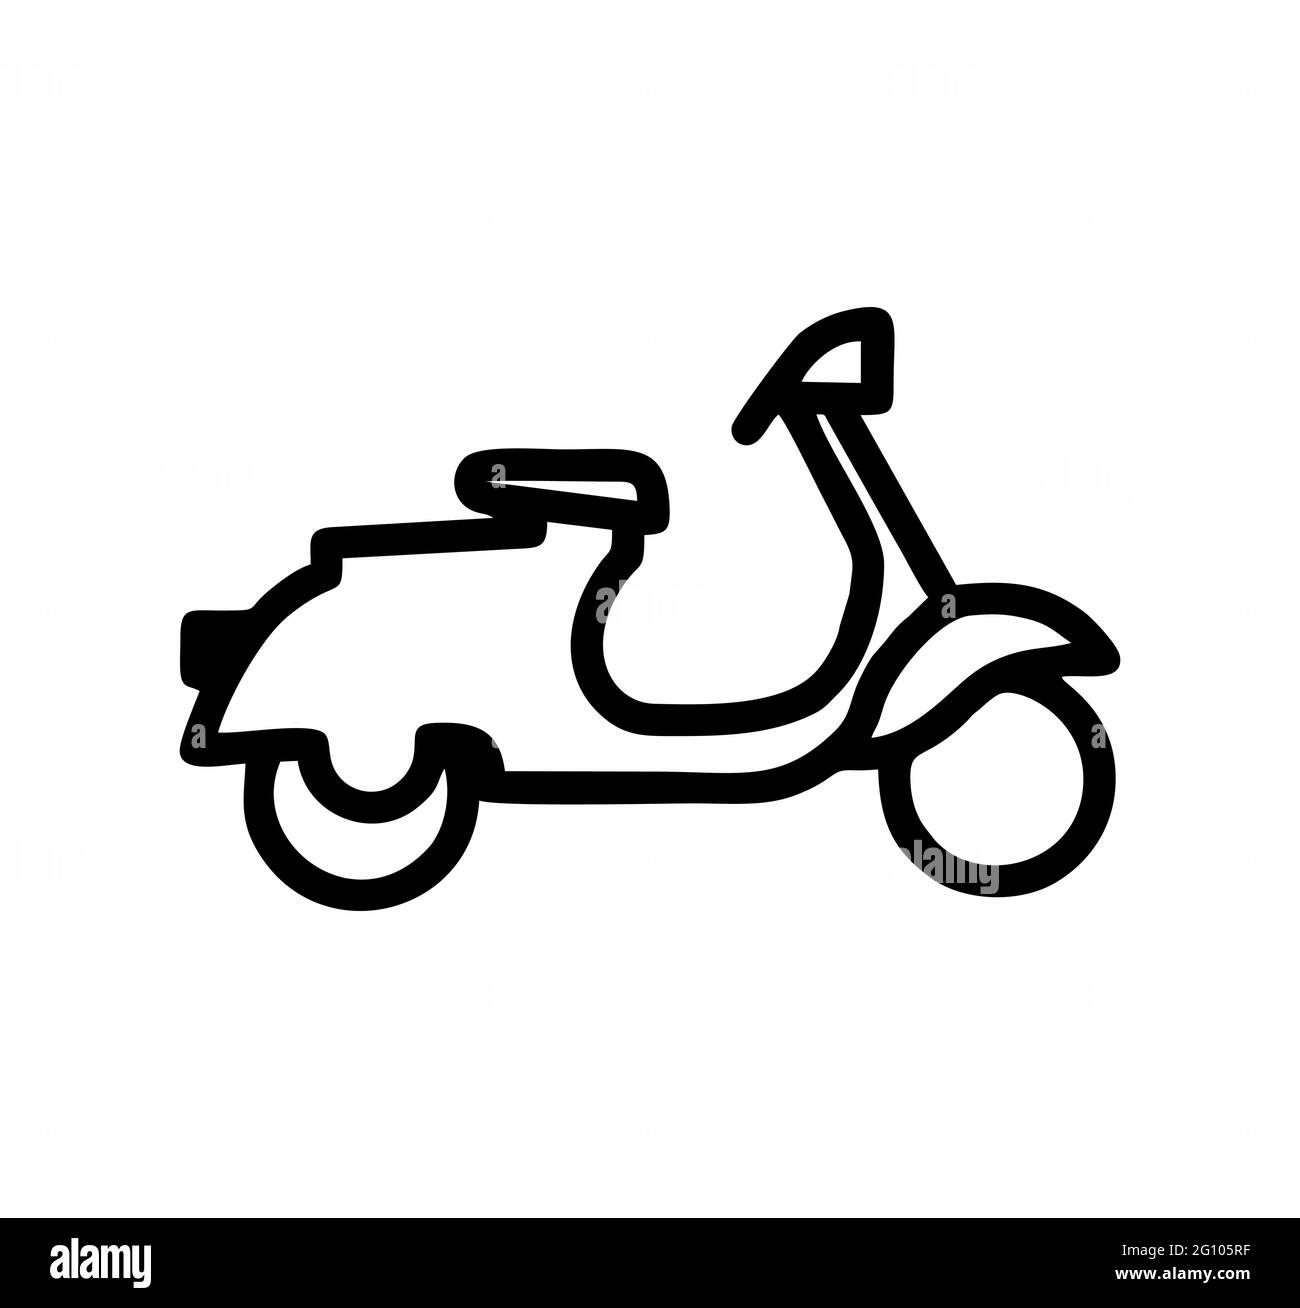 Scooter or moped in black and white isolated vector for logo, sign, apps or website Stock Vector